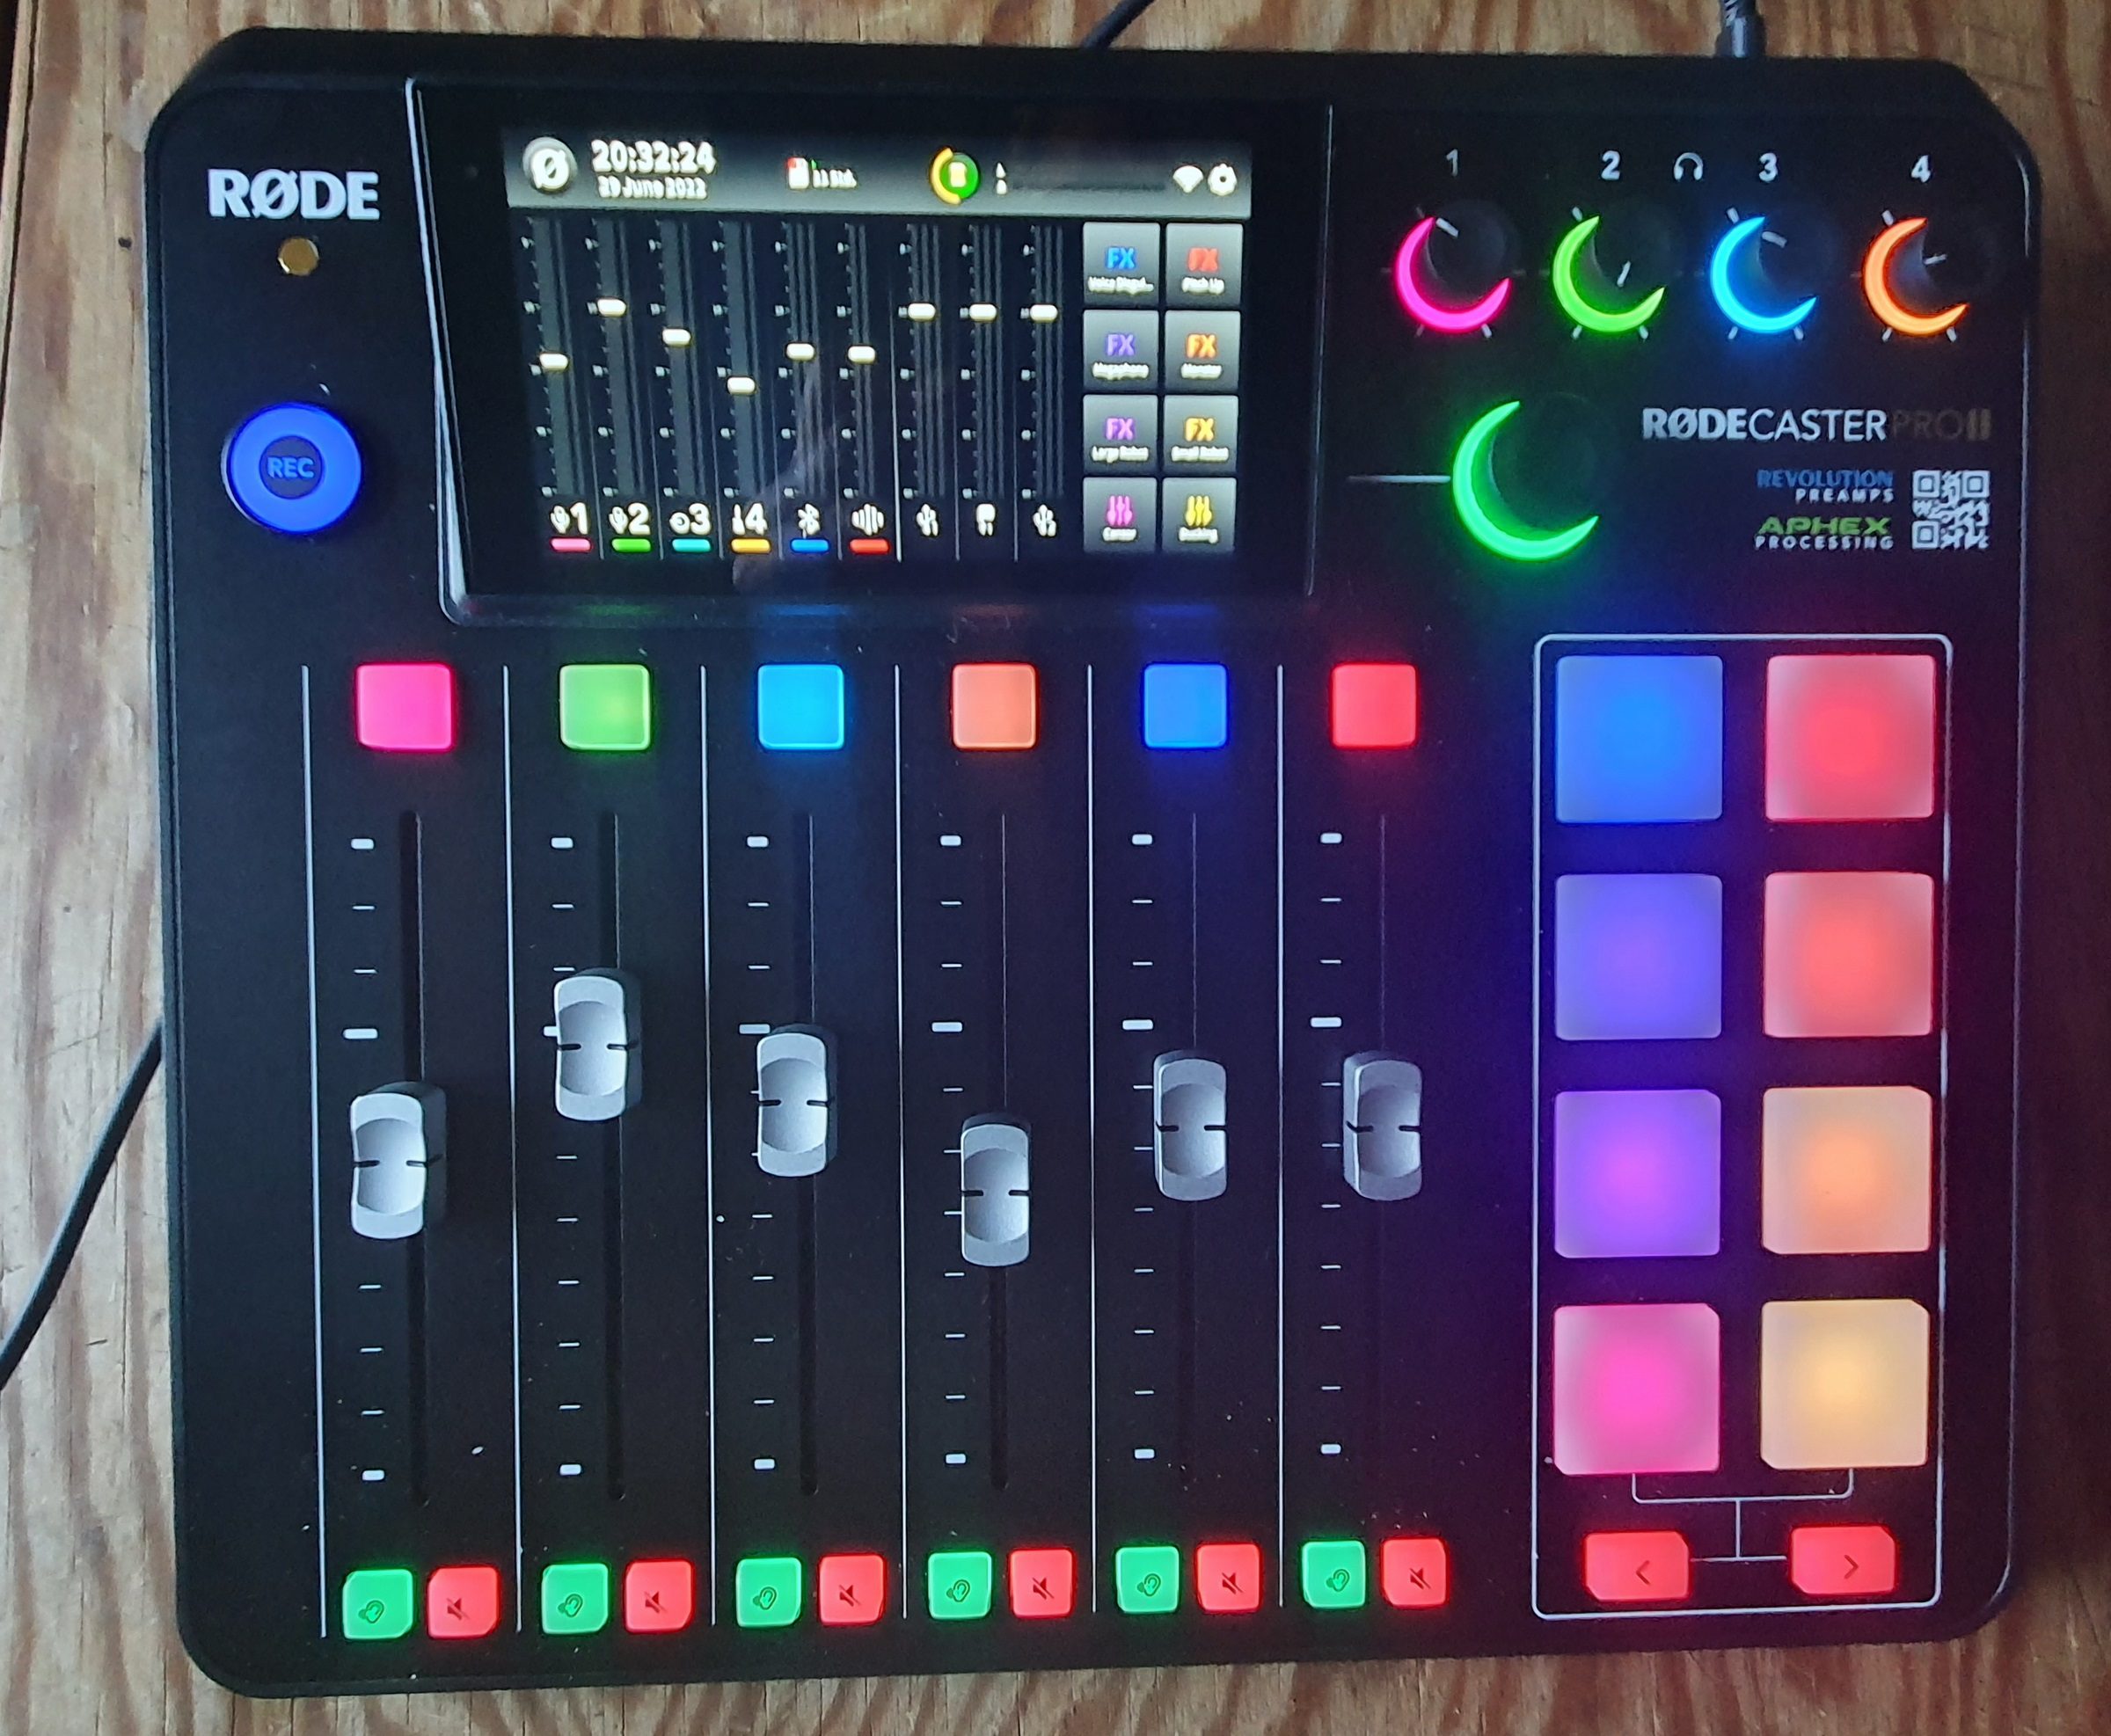 Rodecaster Pro 2 & Rode Podmic